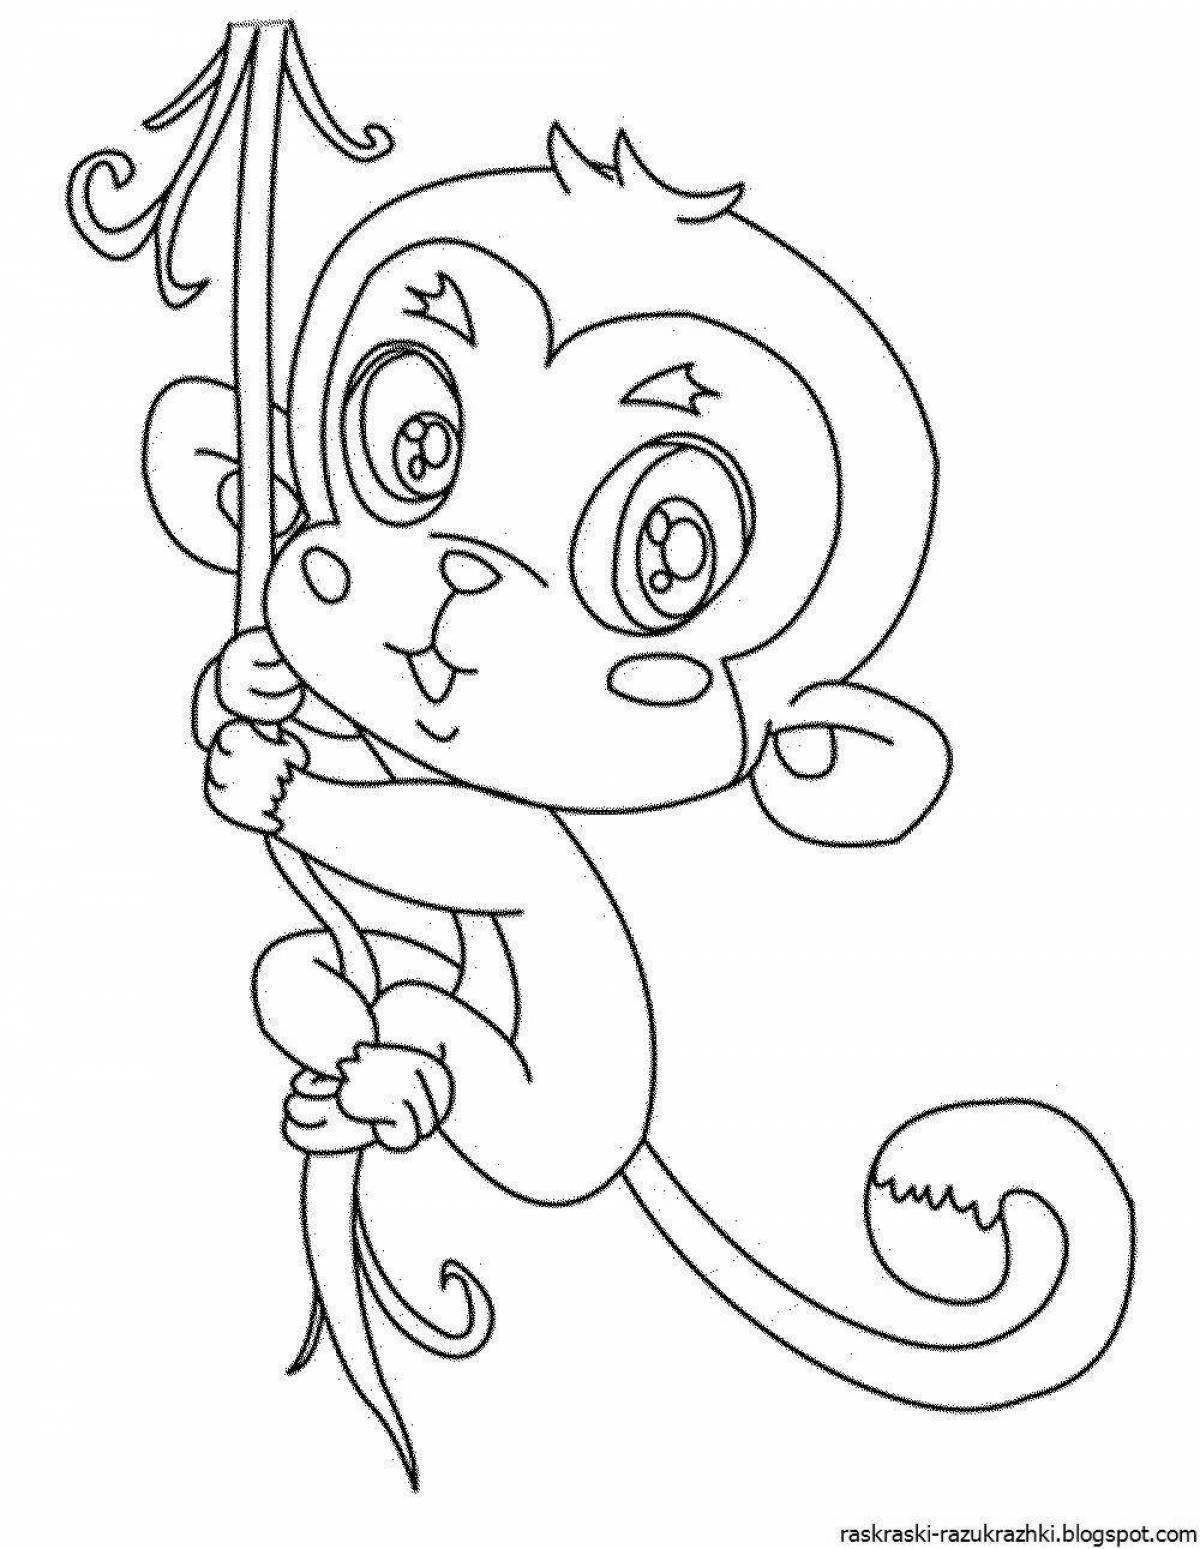 Witty monkey coloring book